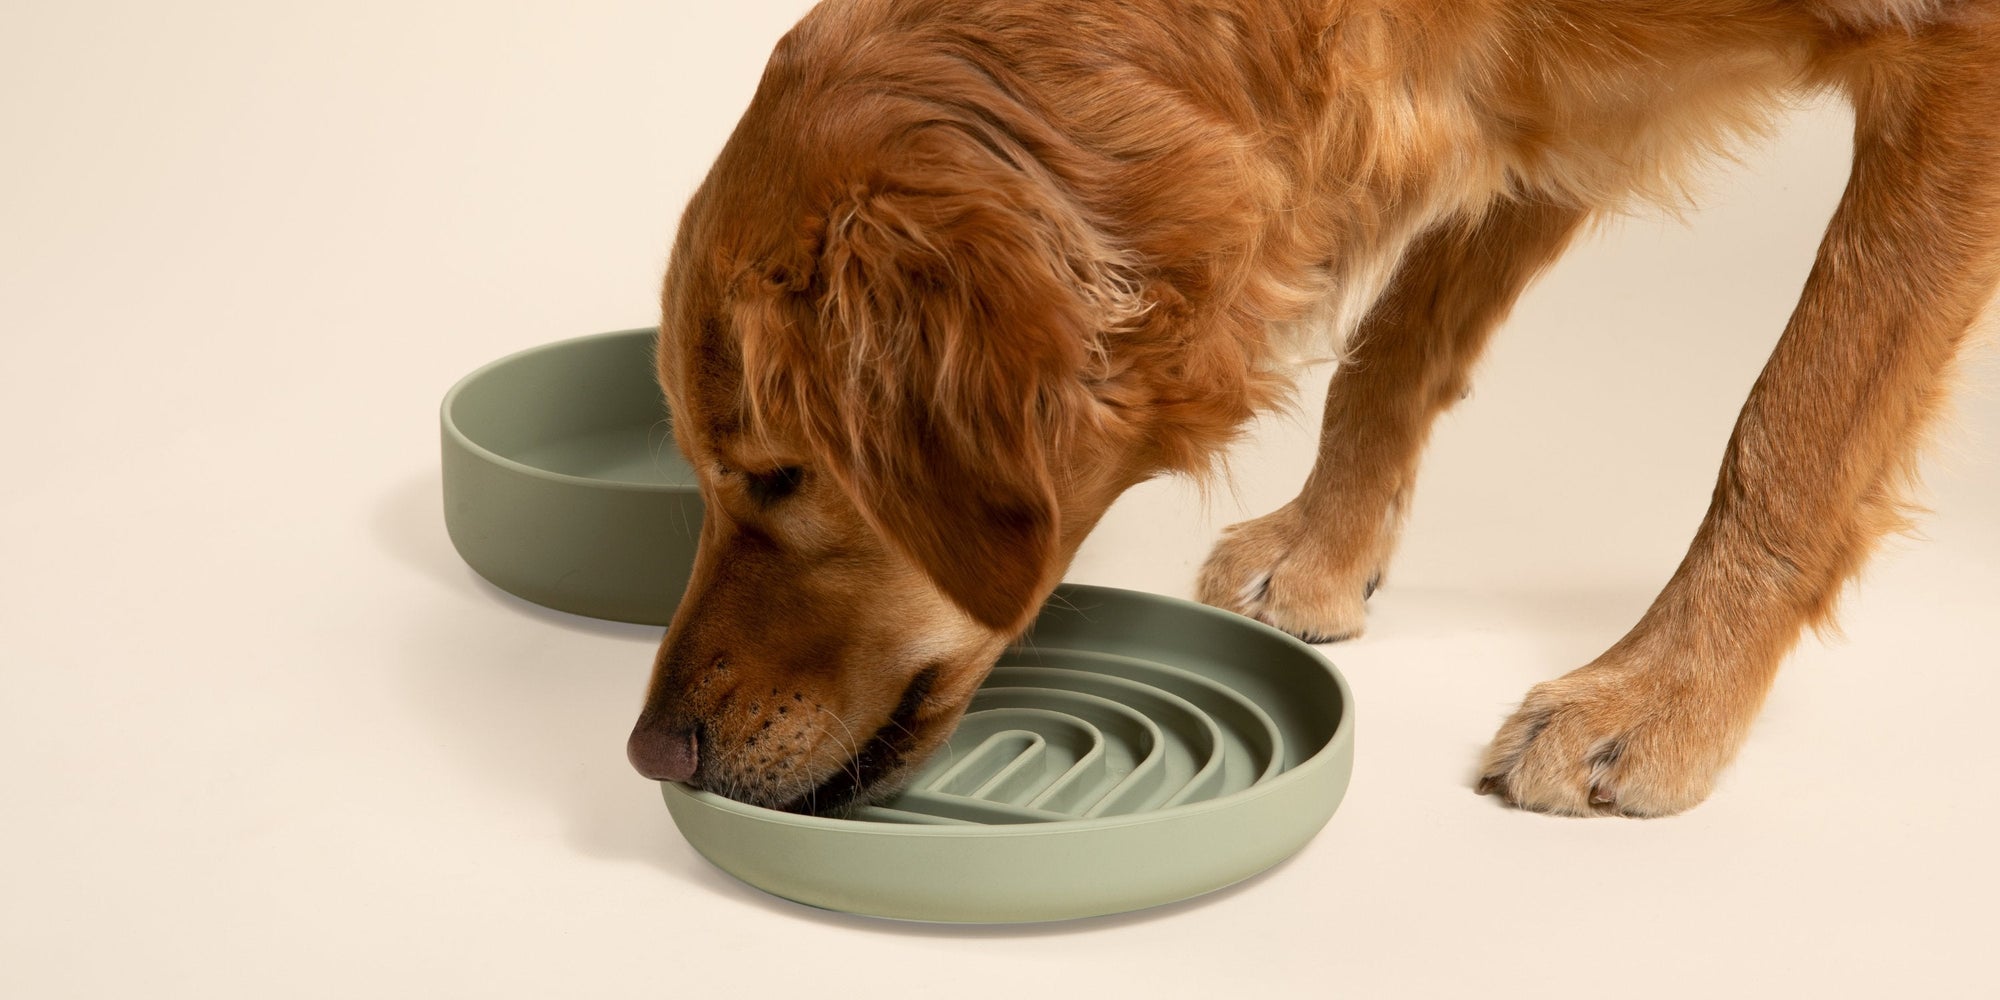 Labradoodle dog eating from a slow feeder dog bowl